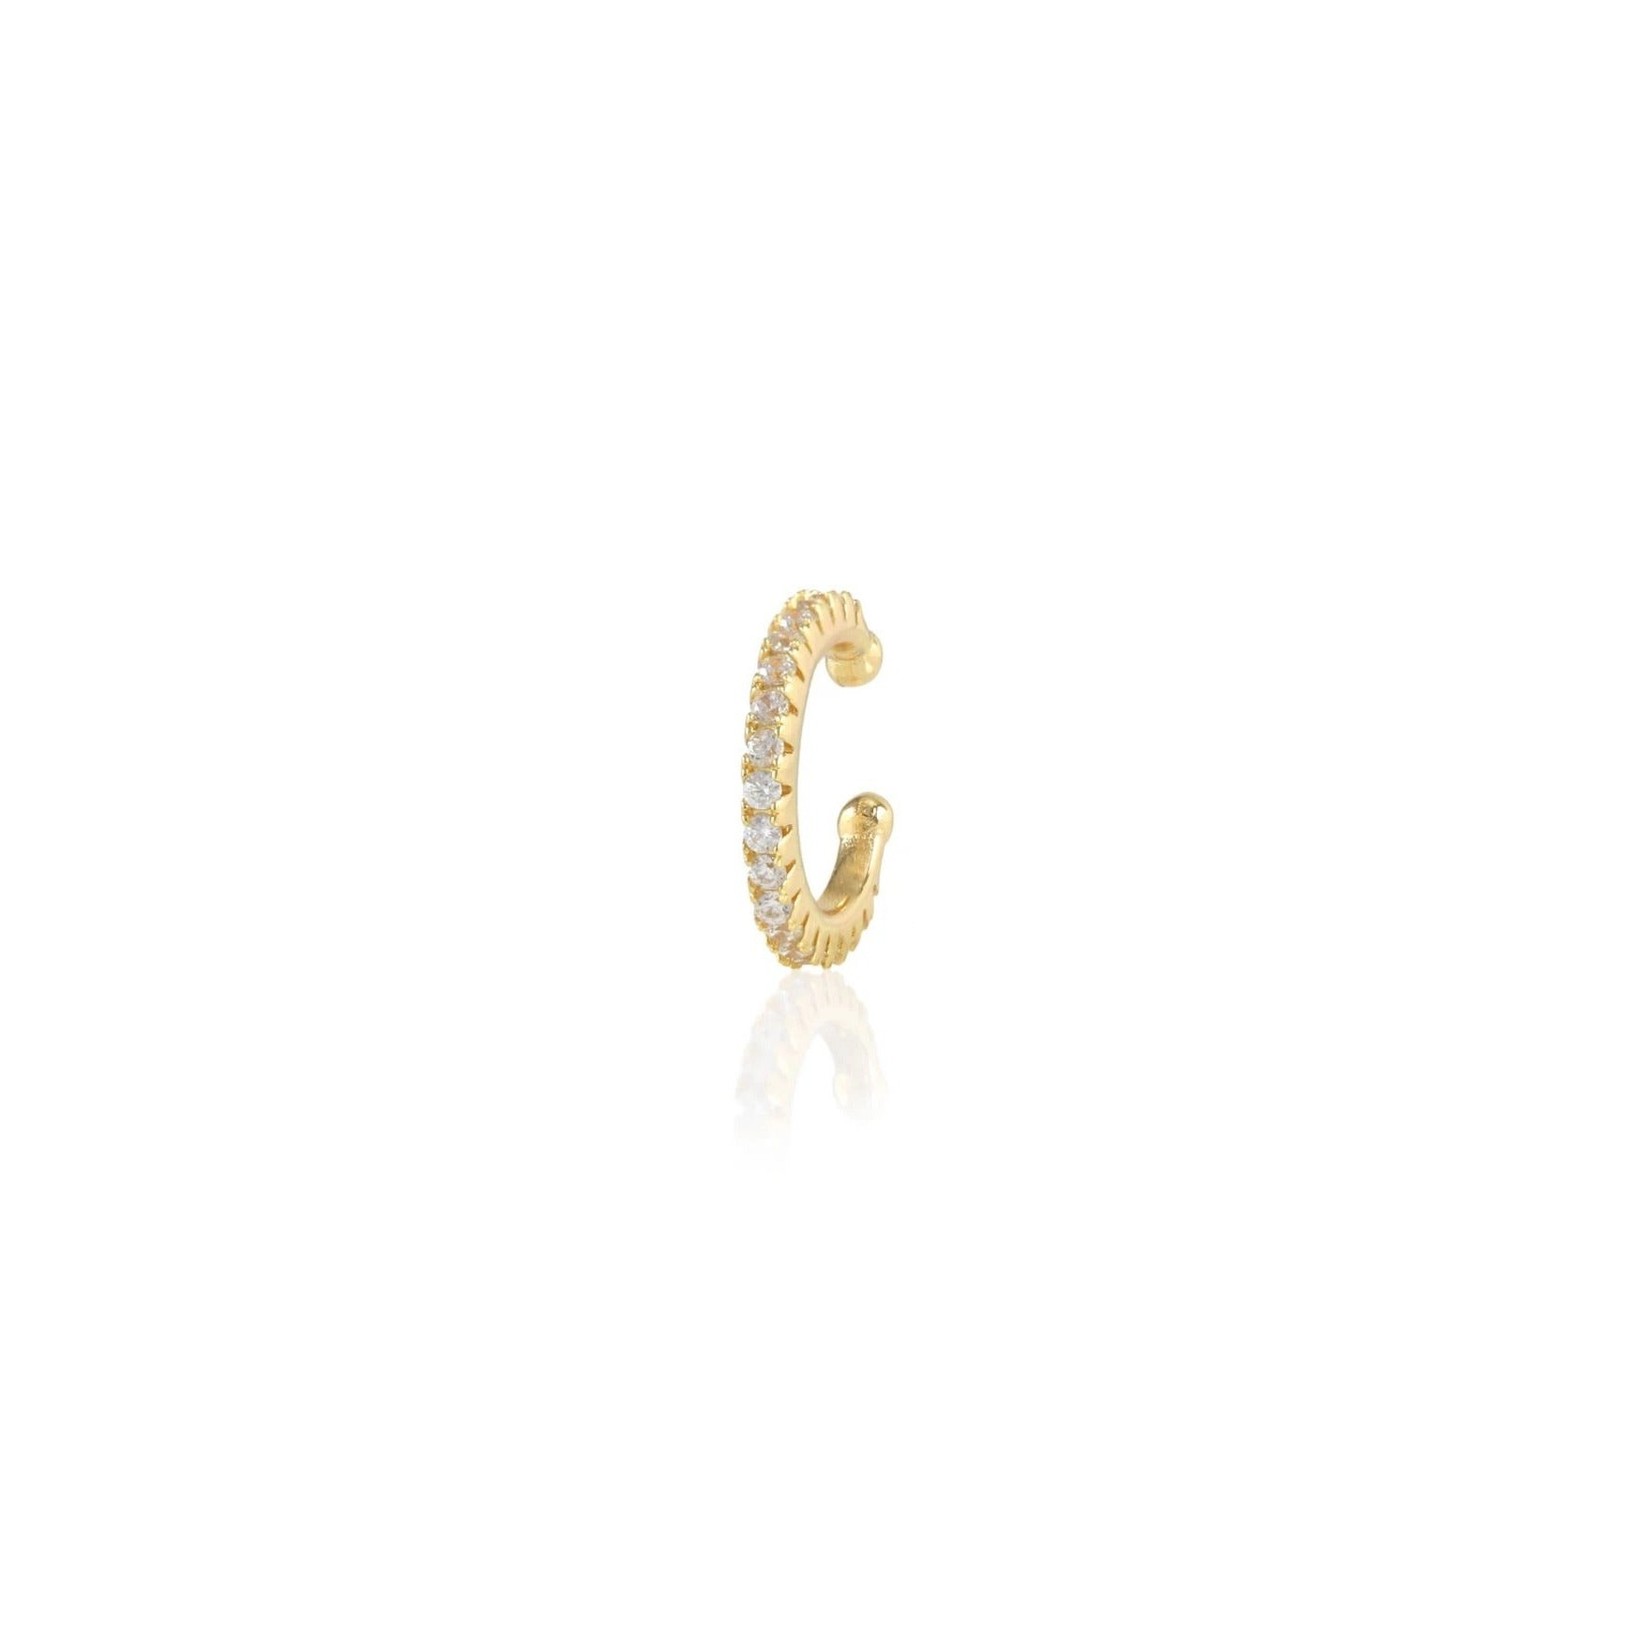 Kris Nations Round Crystal Ear Cuff Gold